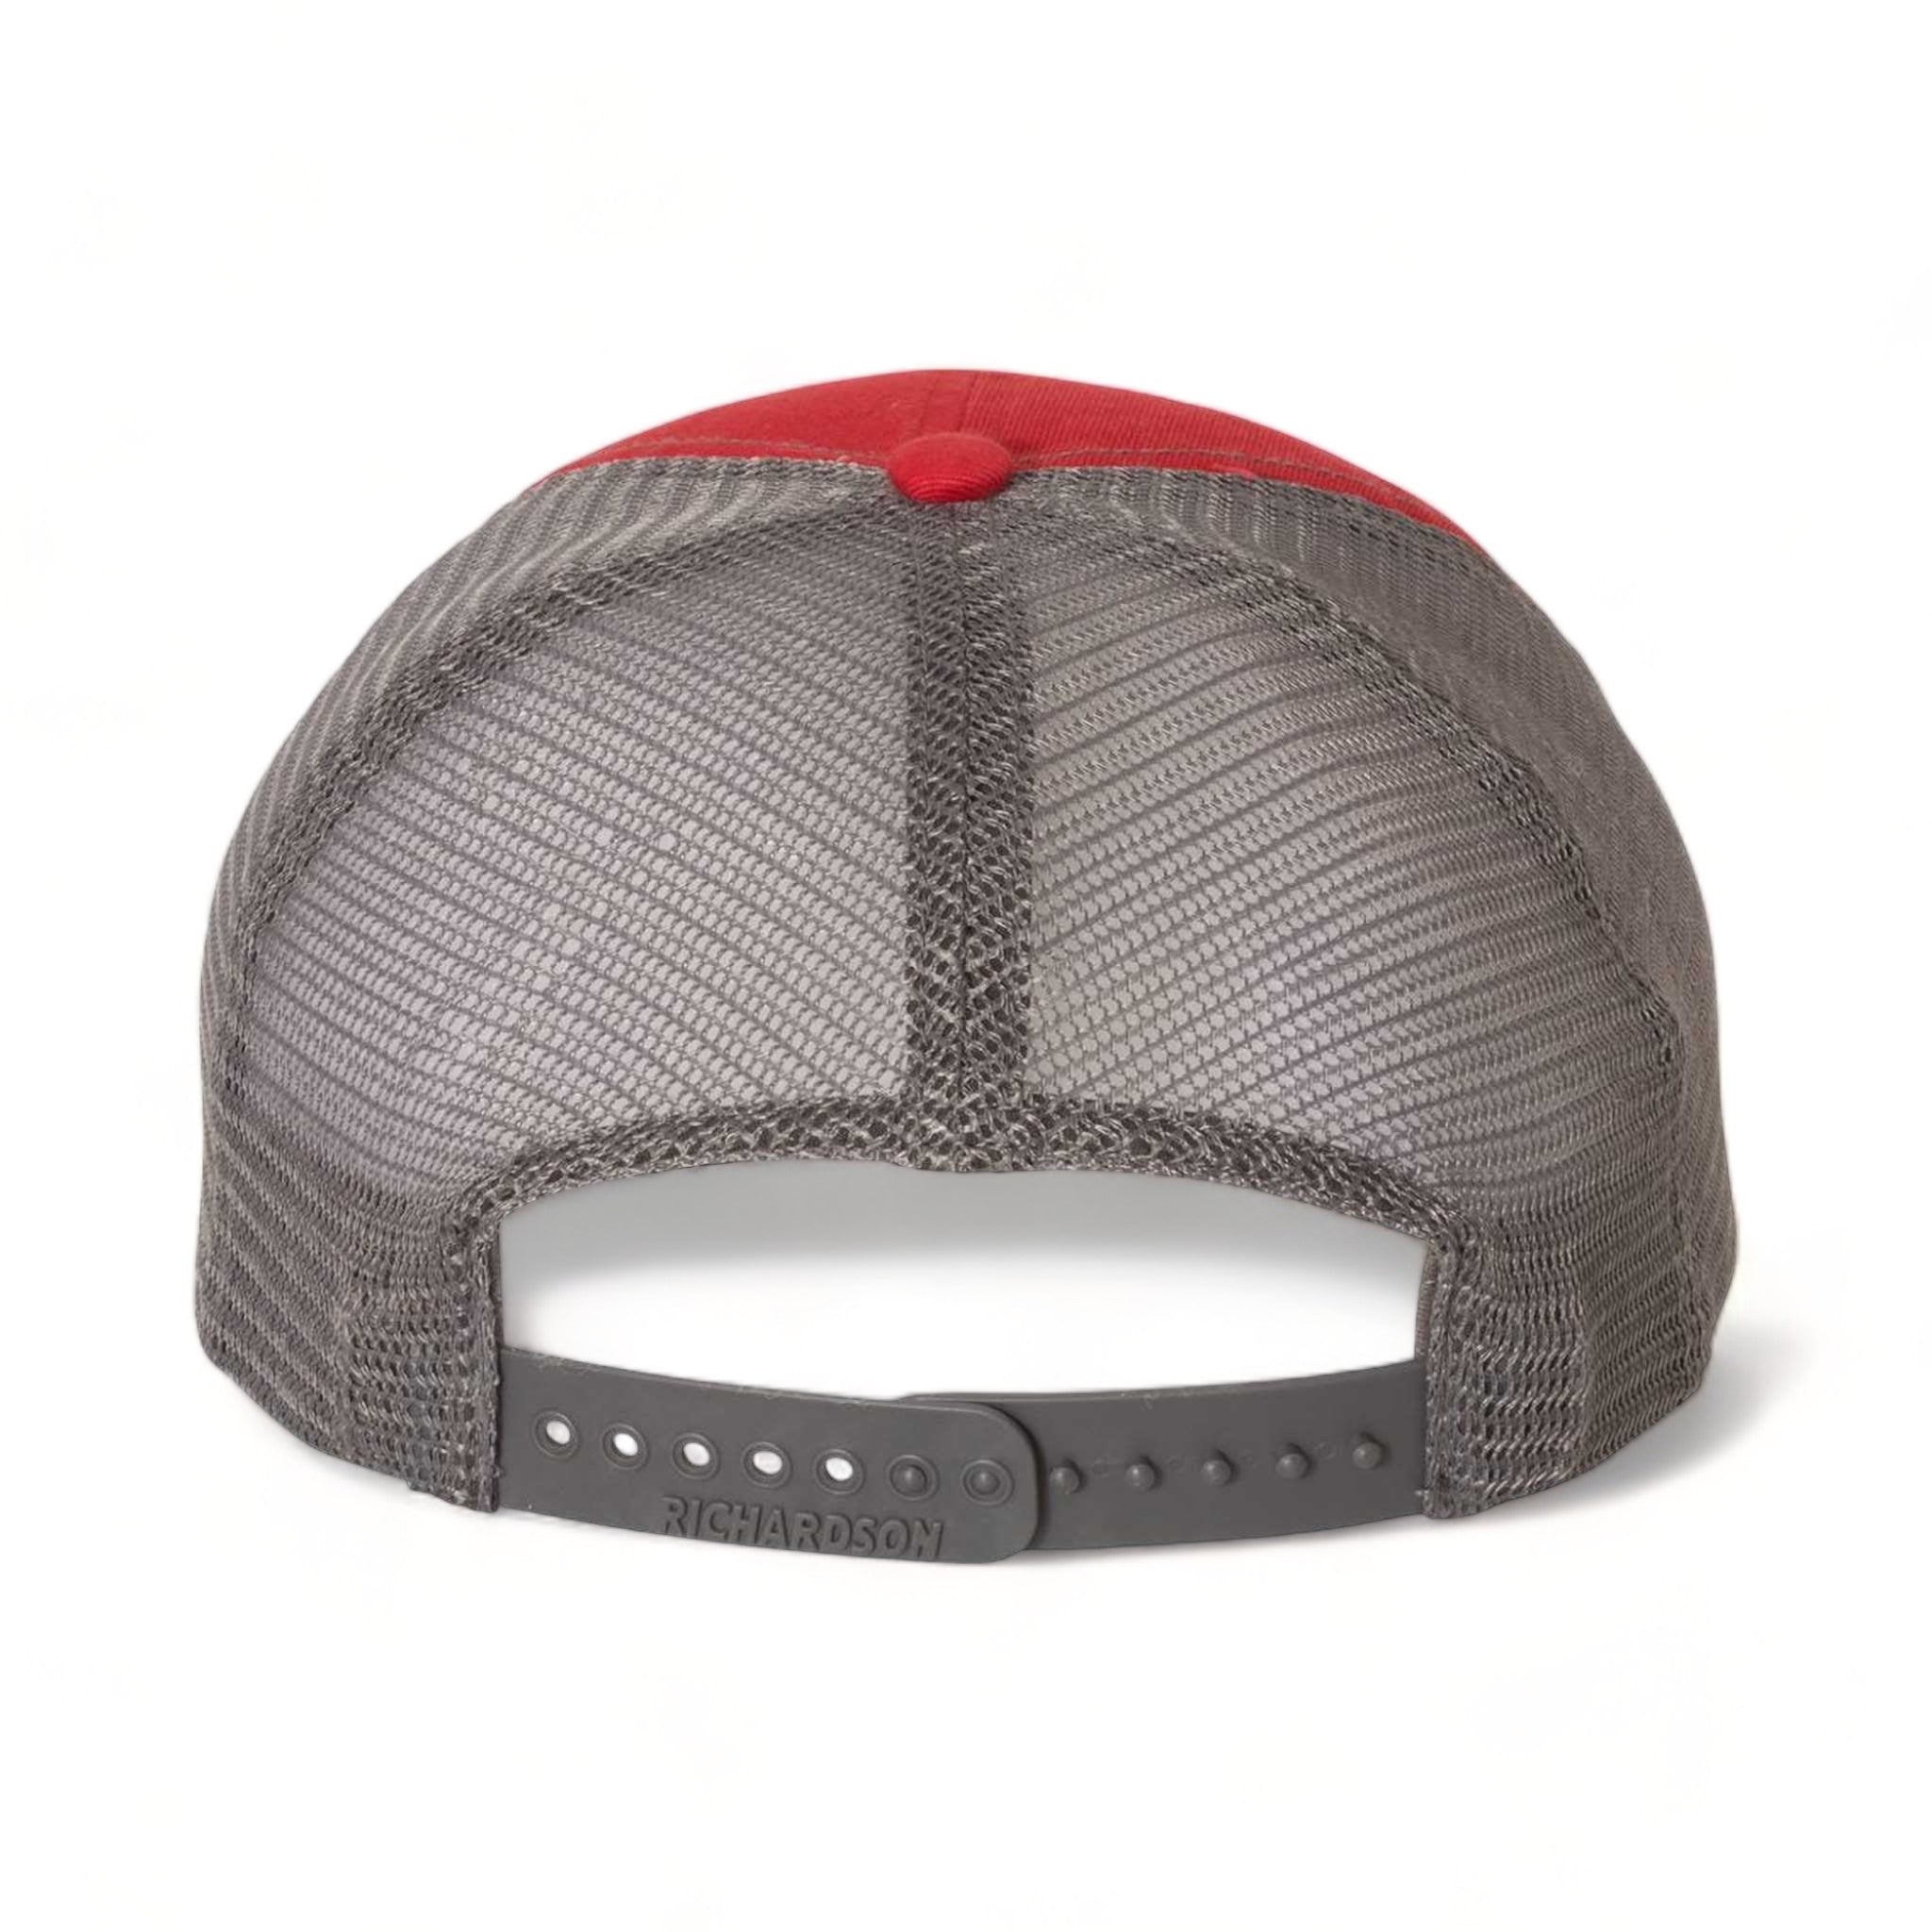 Back view of Richardson 111 custom hat in red and charcoal